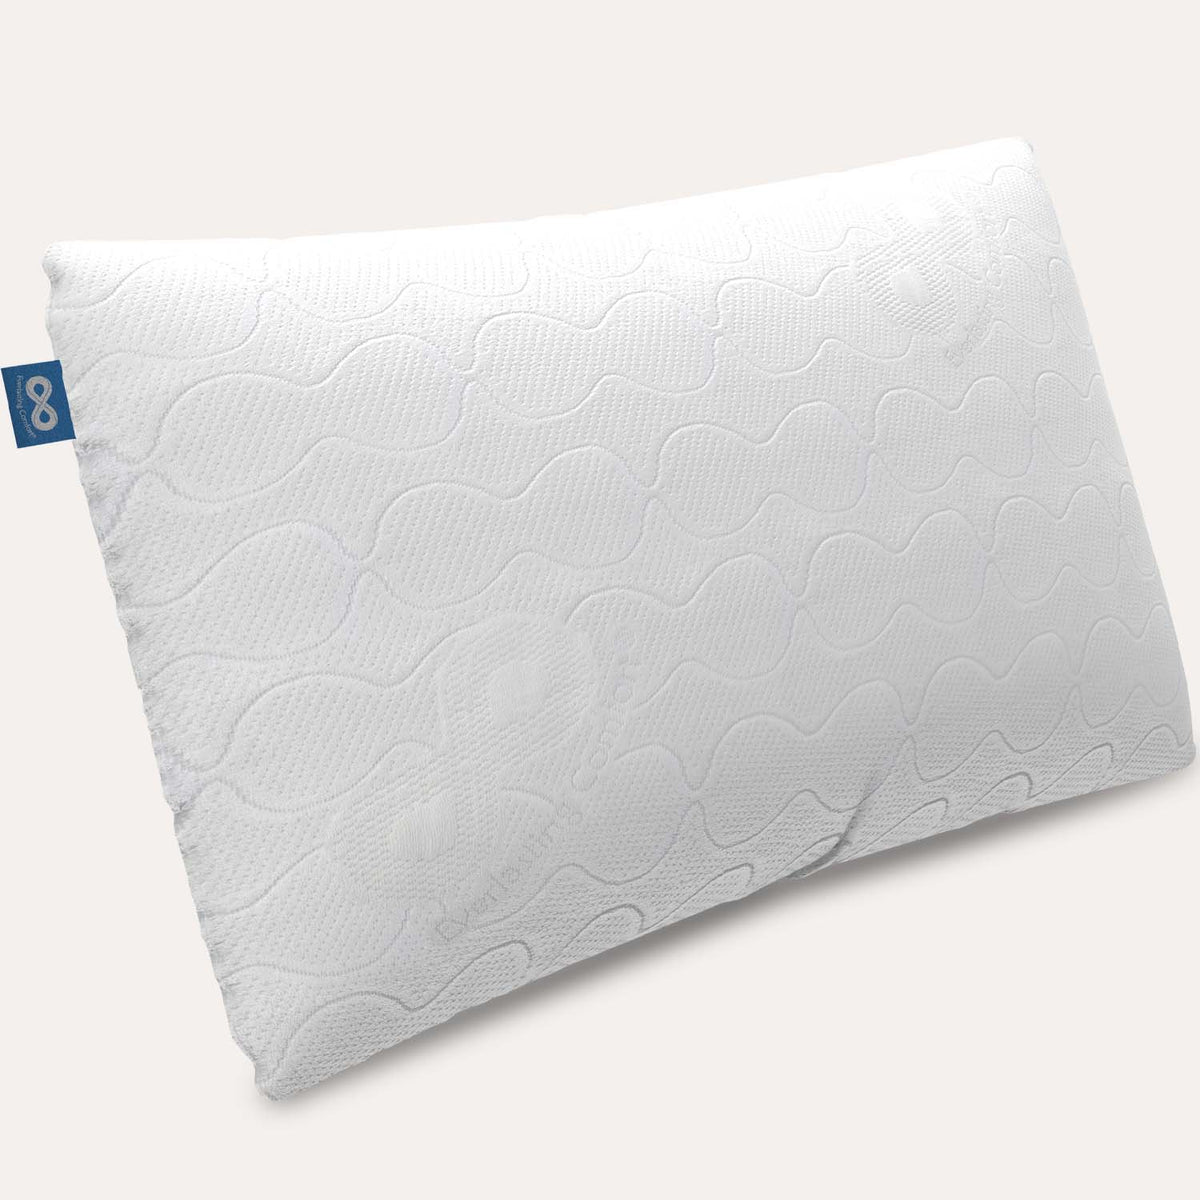 Everlasting Comfort Body Pillow - White - 250 requests